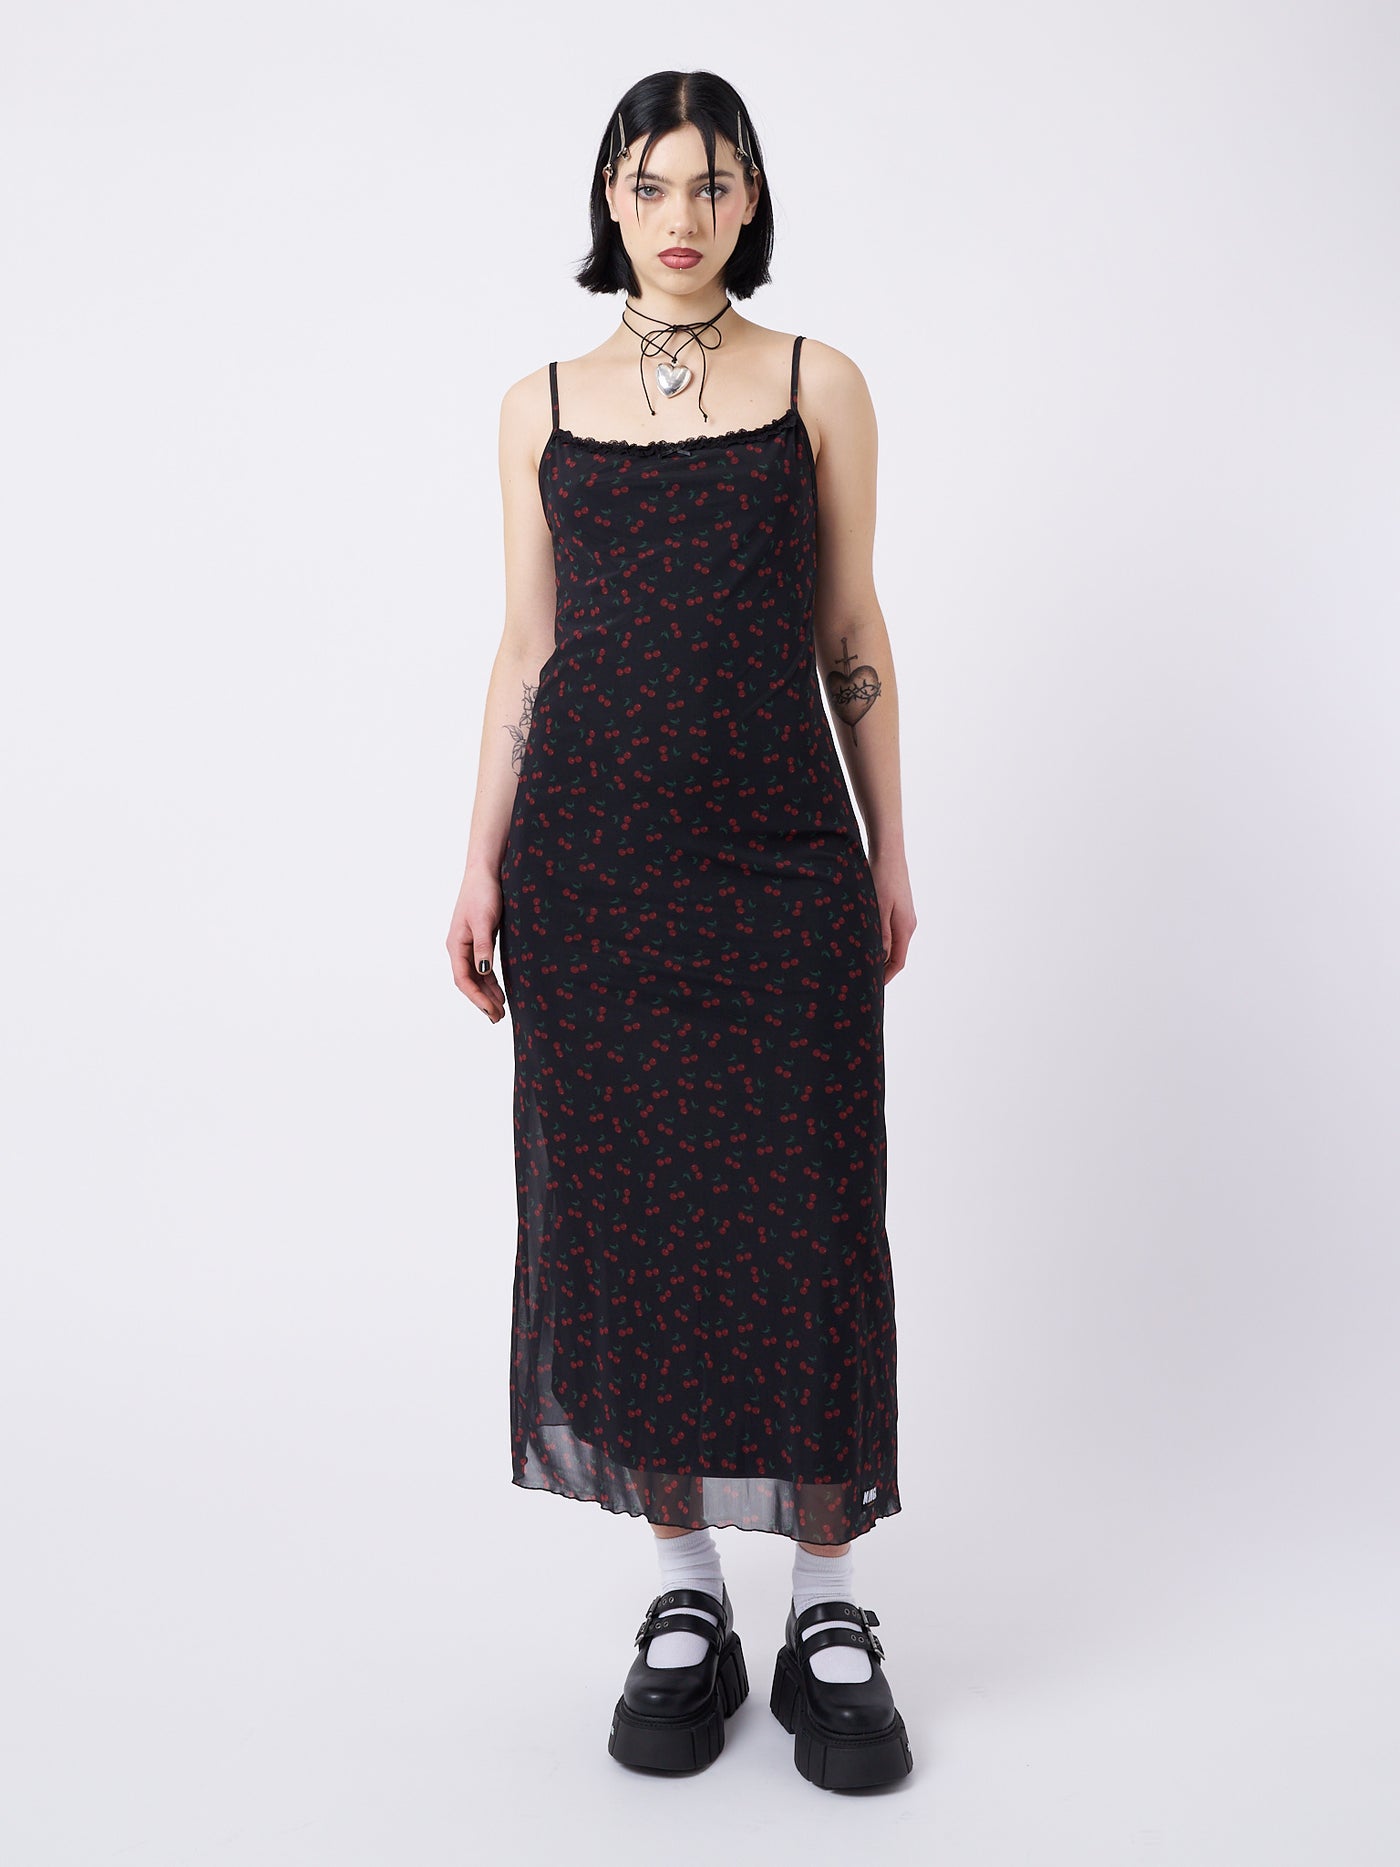 A mesh maxi dress with cherries print in black by Minga London. This skirt features a flirty and airy design, perfect for adding a playful and trendy touch to your outfit.